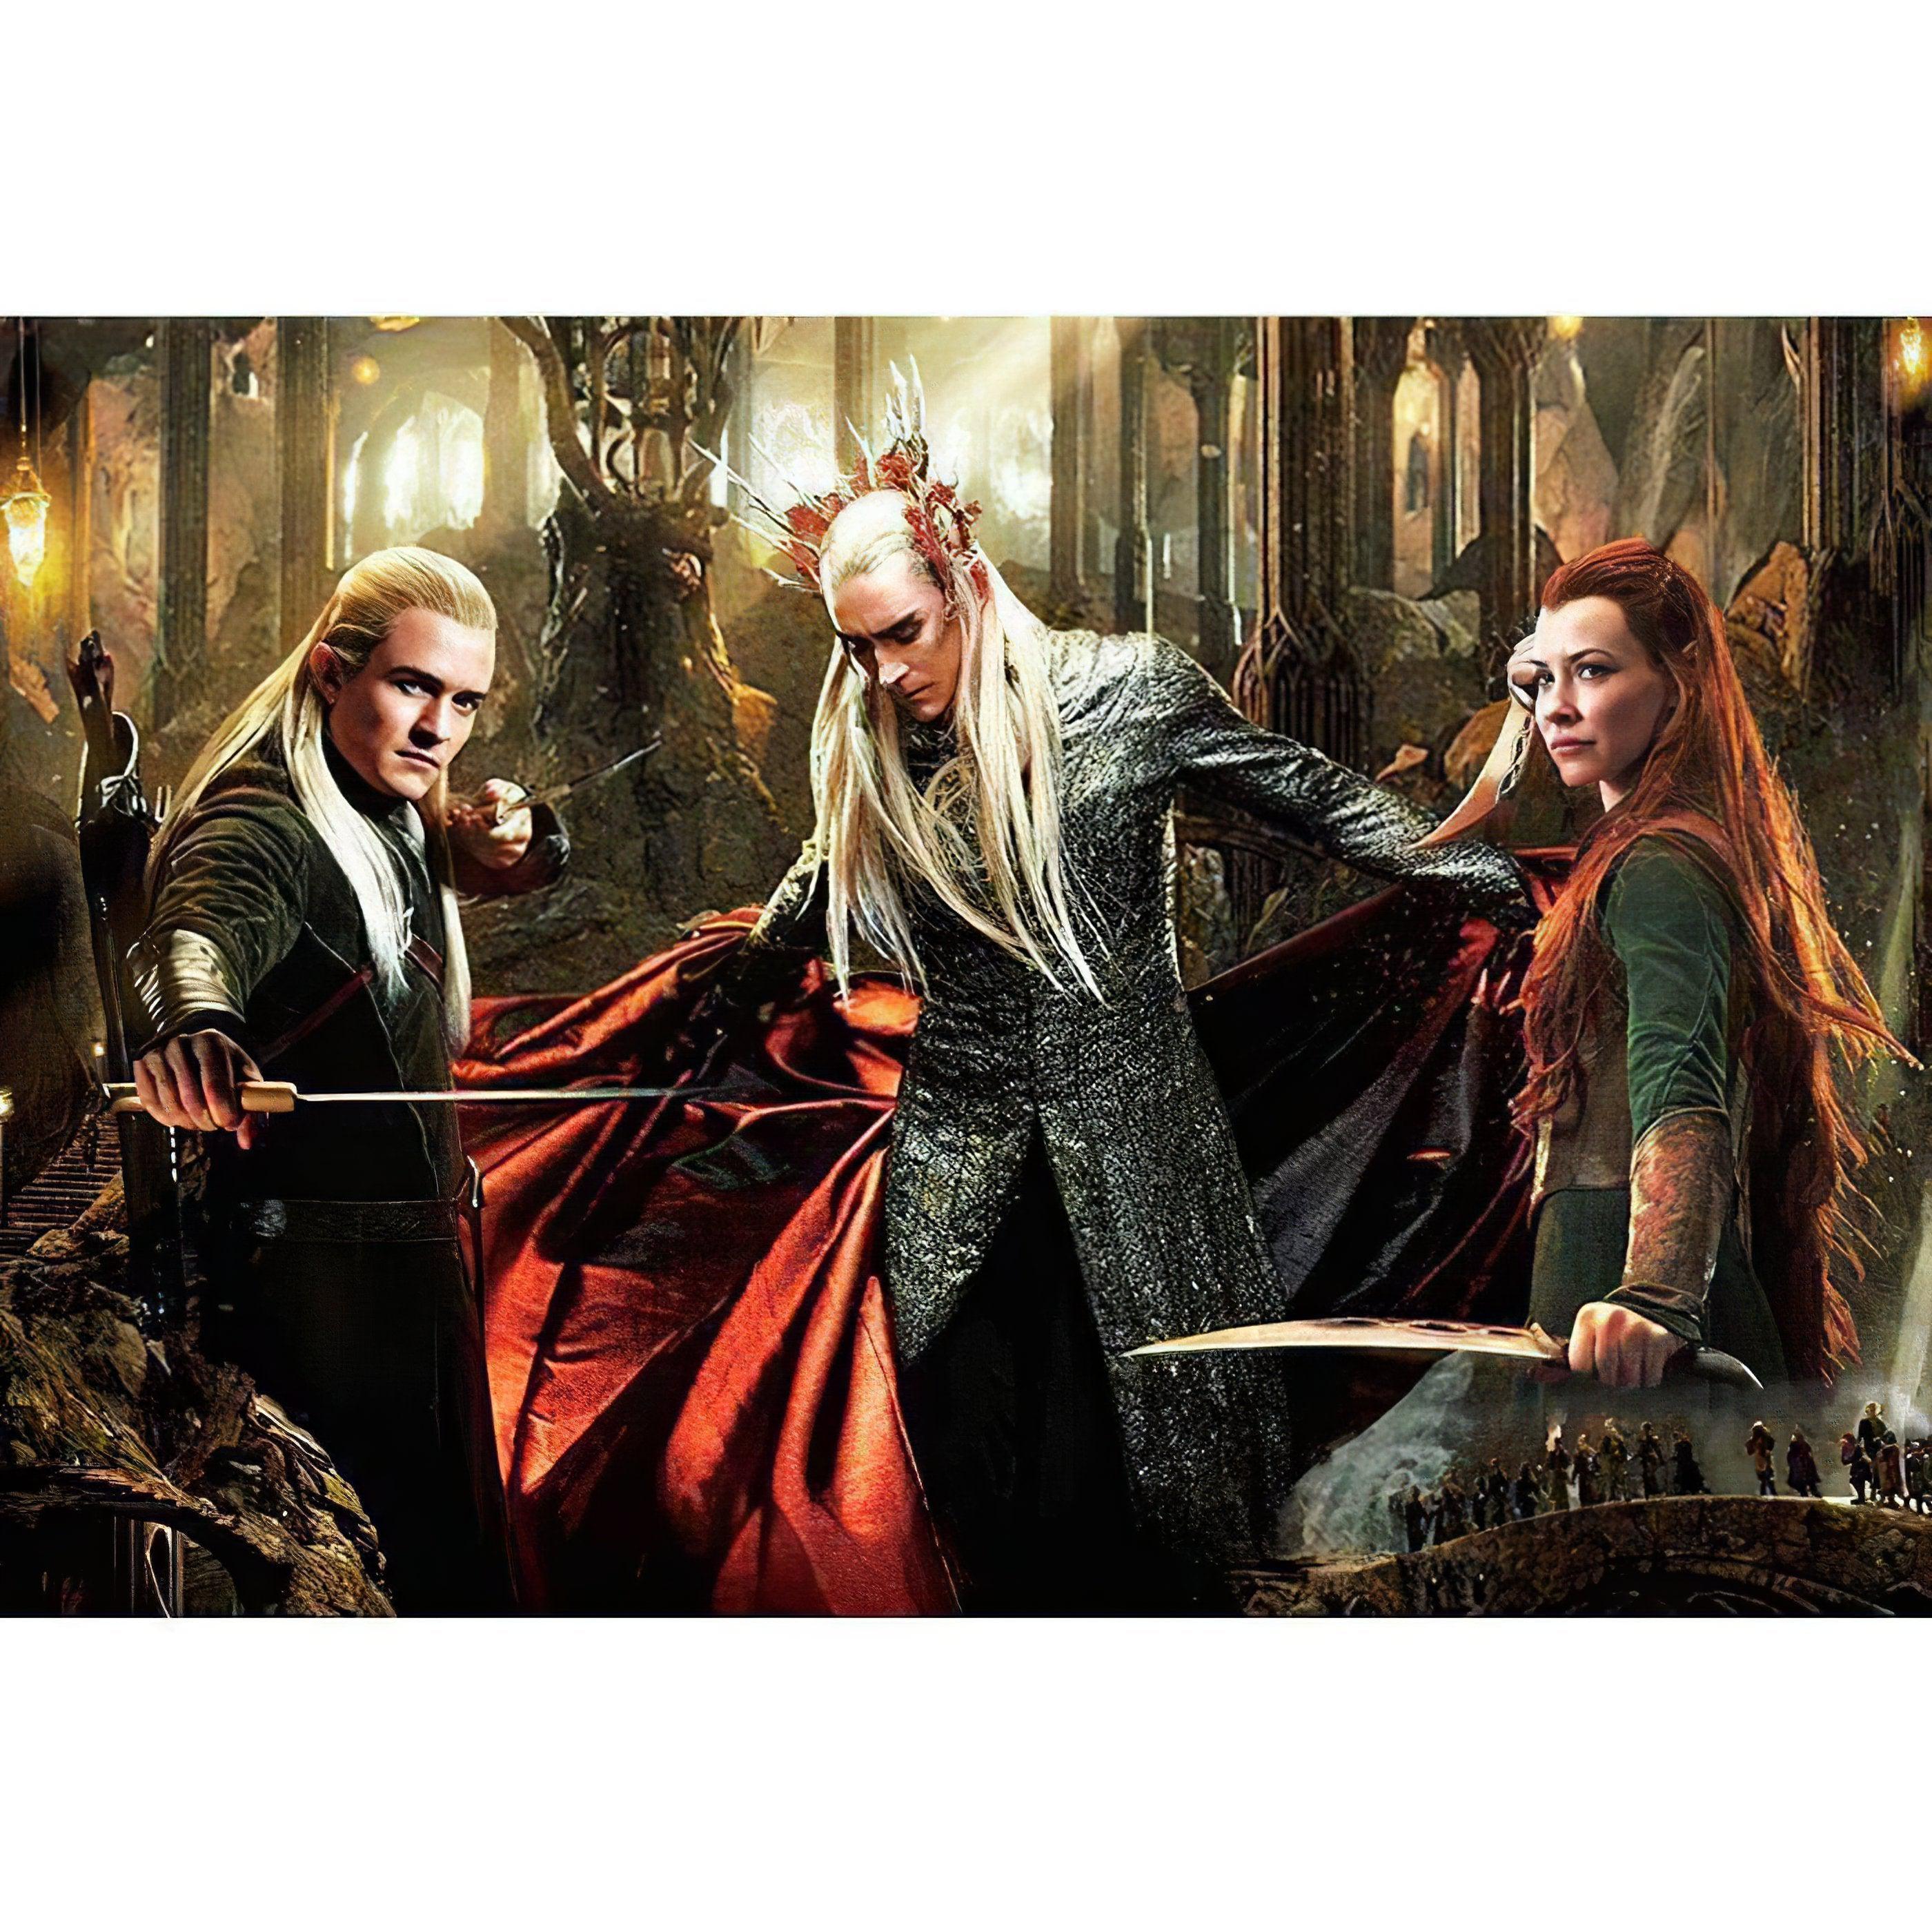 Step into Middle-earth with Legolas and company.Legolas, Tauriel And Thranduil From The Hobbit - Diamondartlove